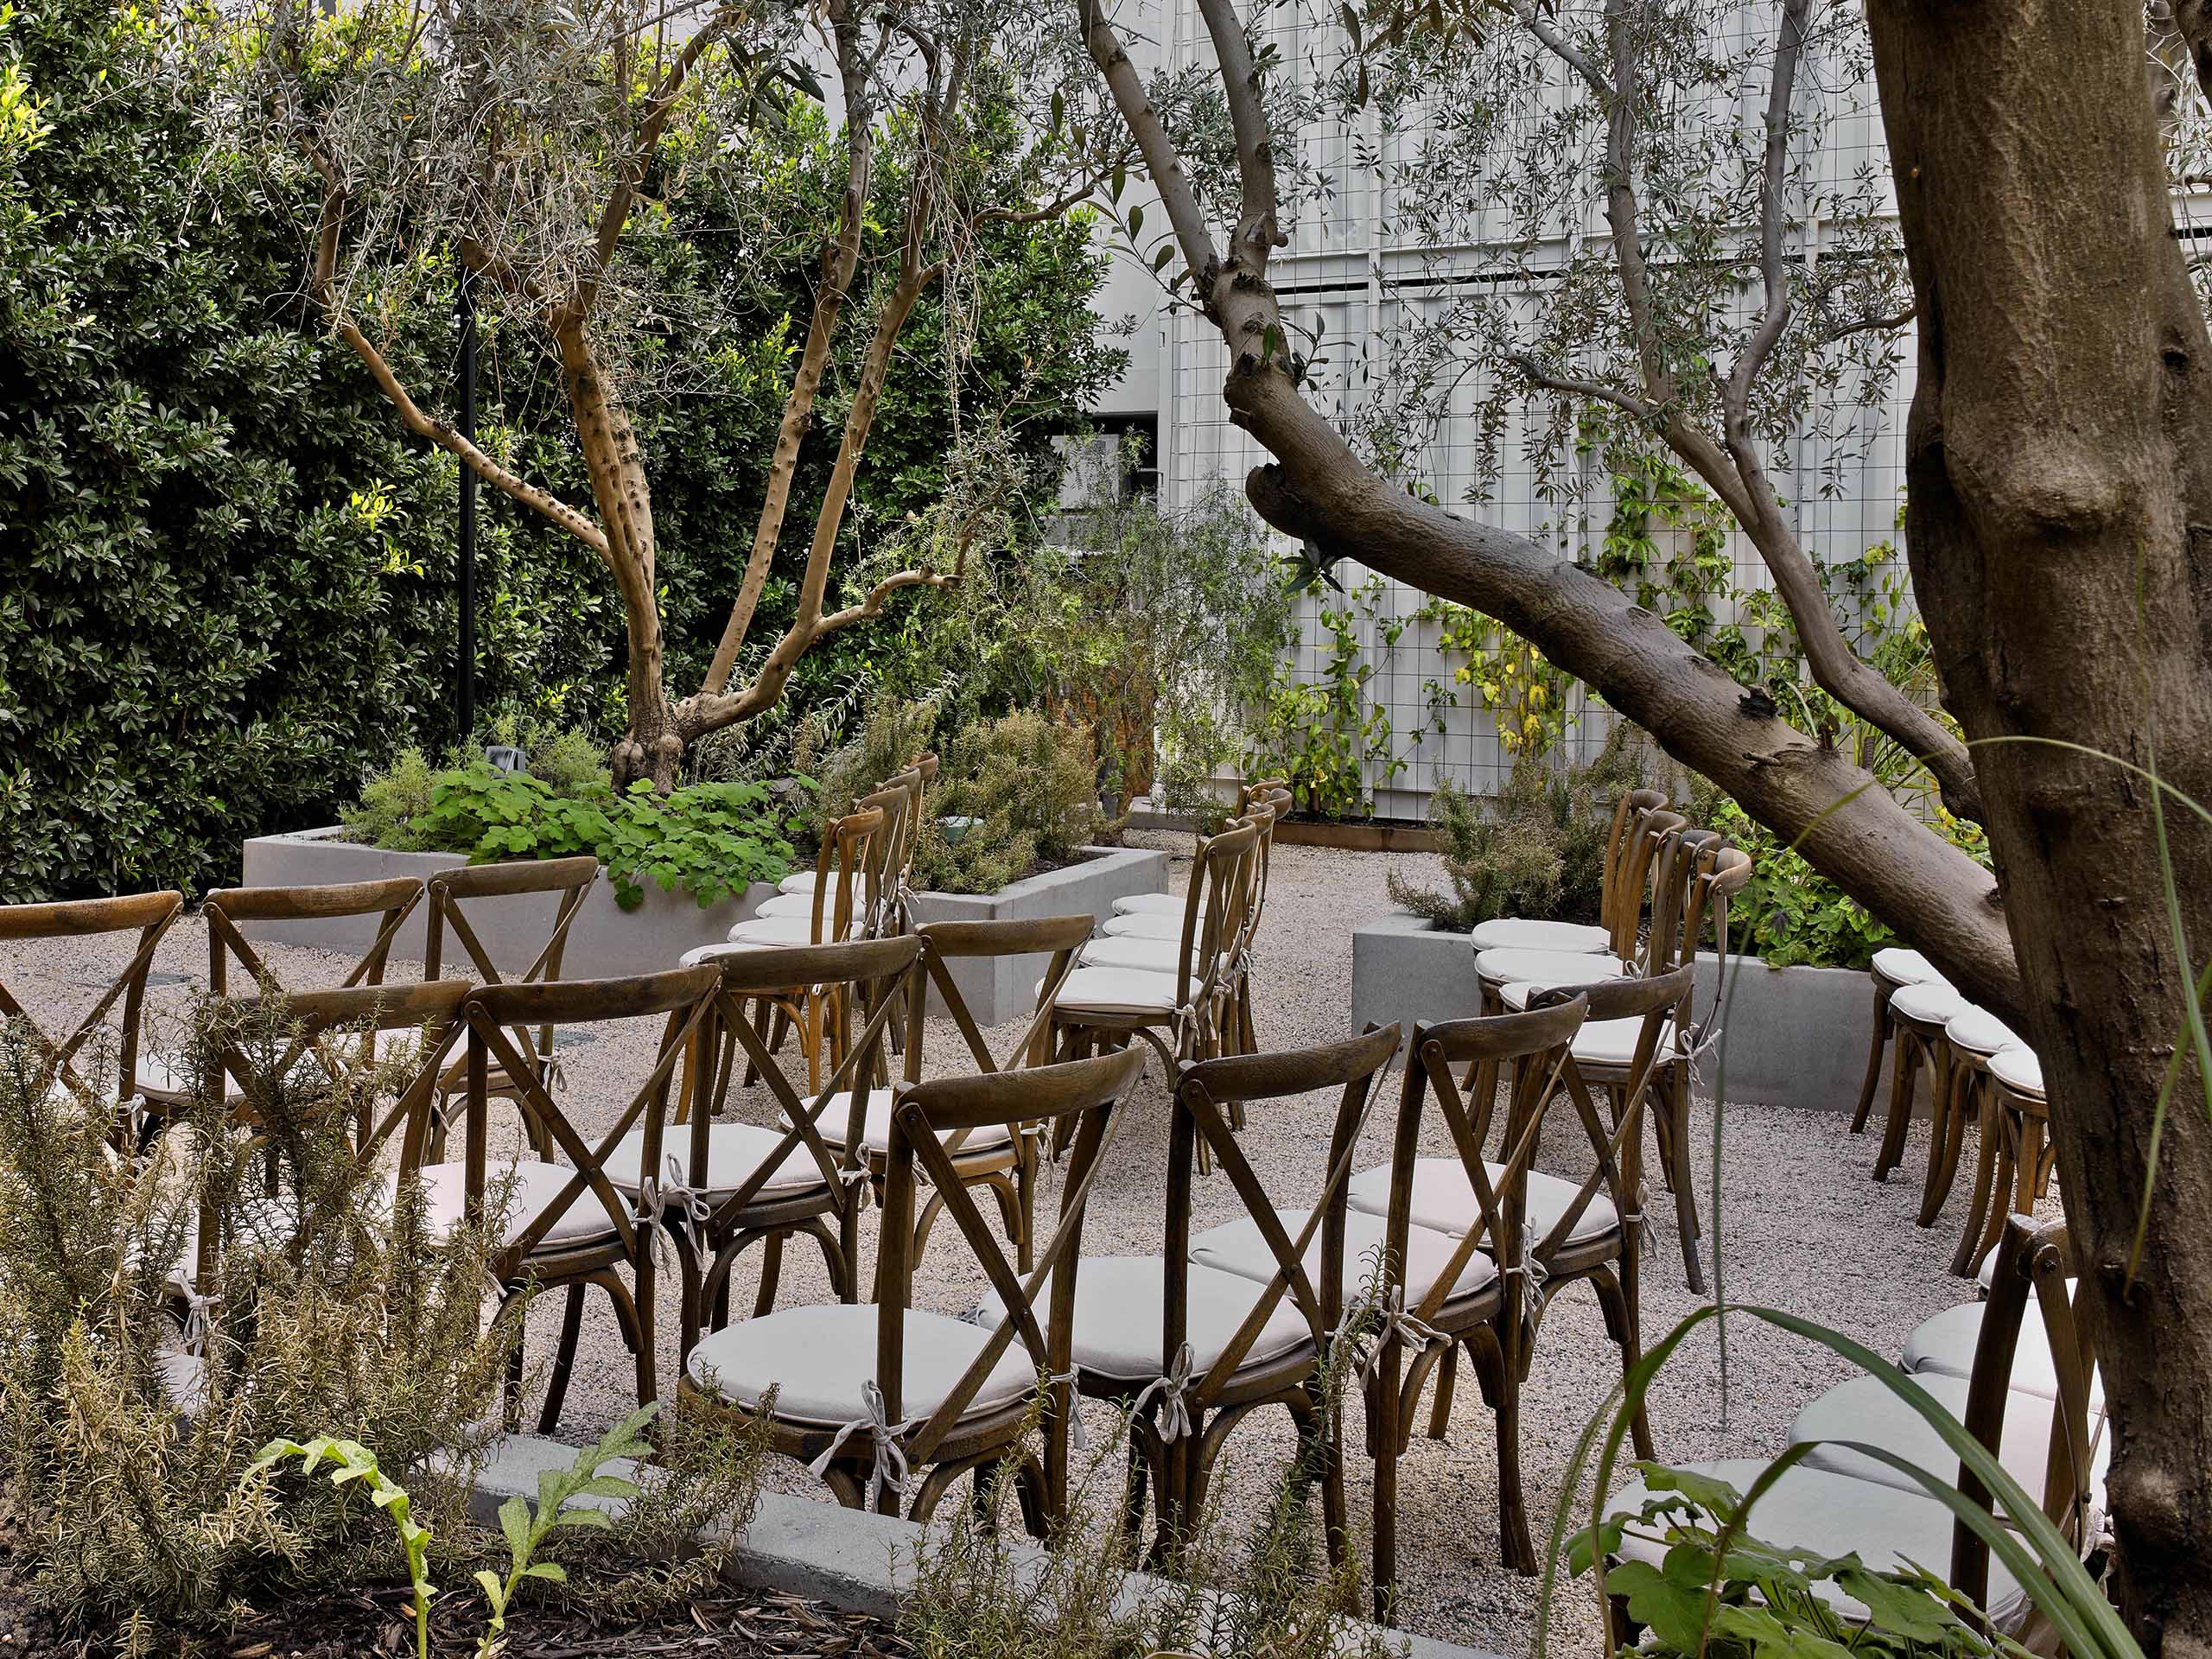 outdoor wedding setup in garden with two aisles of wooden chairs with white cushions